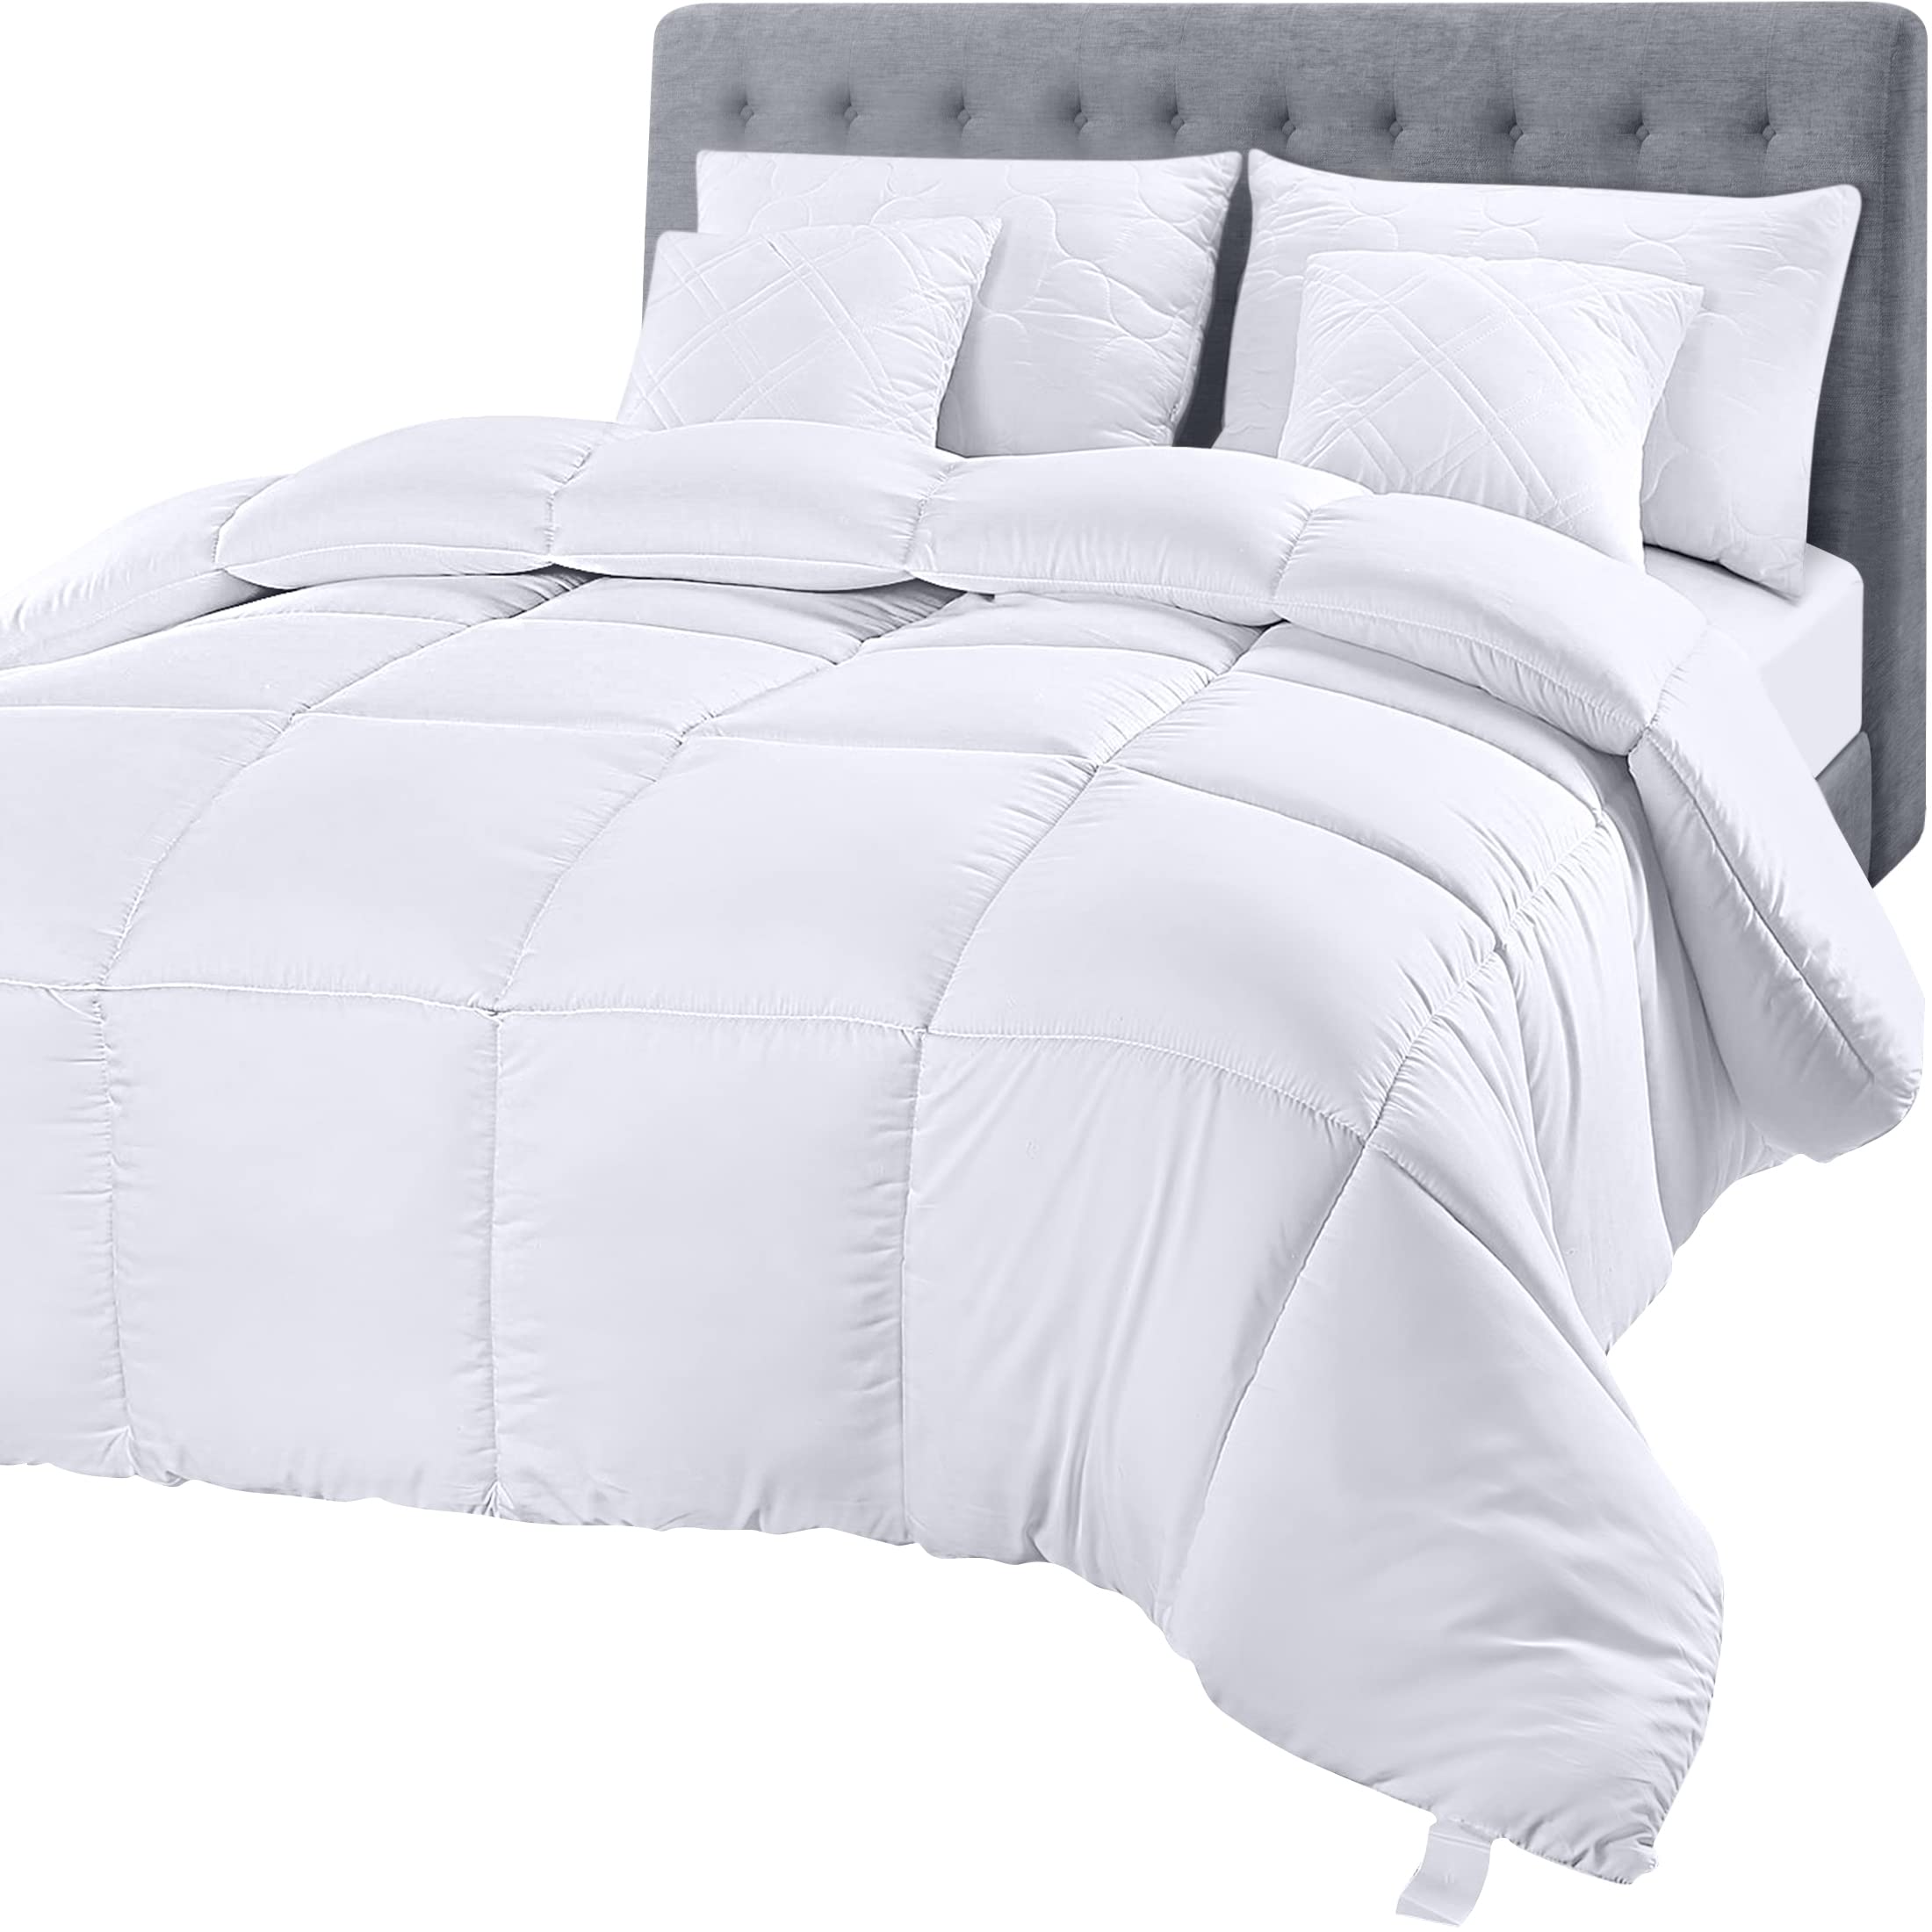 Book Cover Utopia Bedding Comforter Duvet Insert - Quilted Comforter with Corner Tabs - Box Stitched Down Alternative Comforter (Twin XL, White)